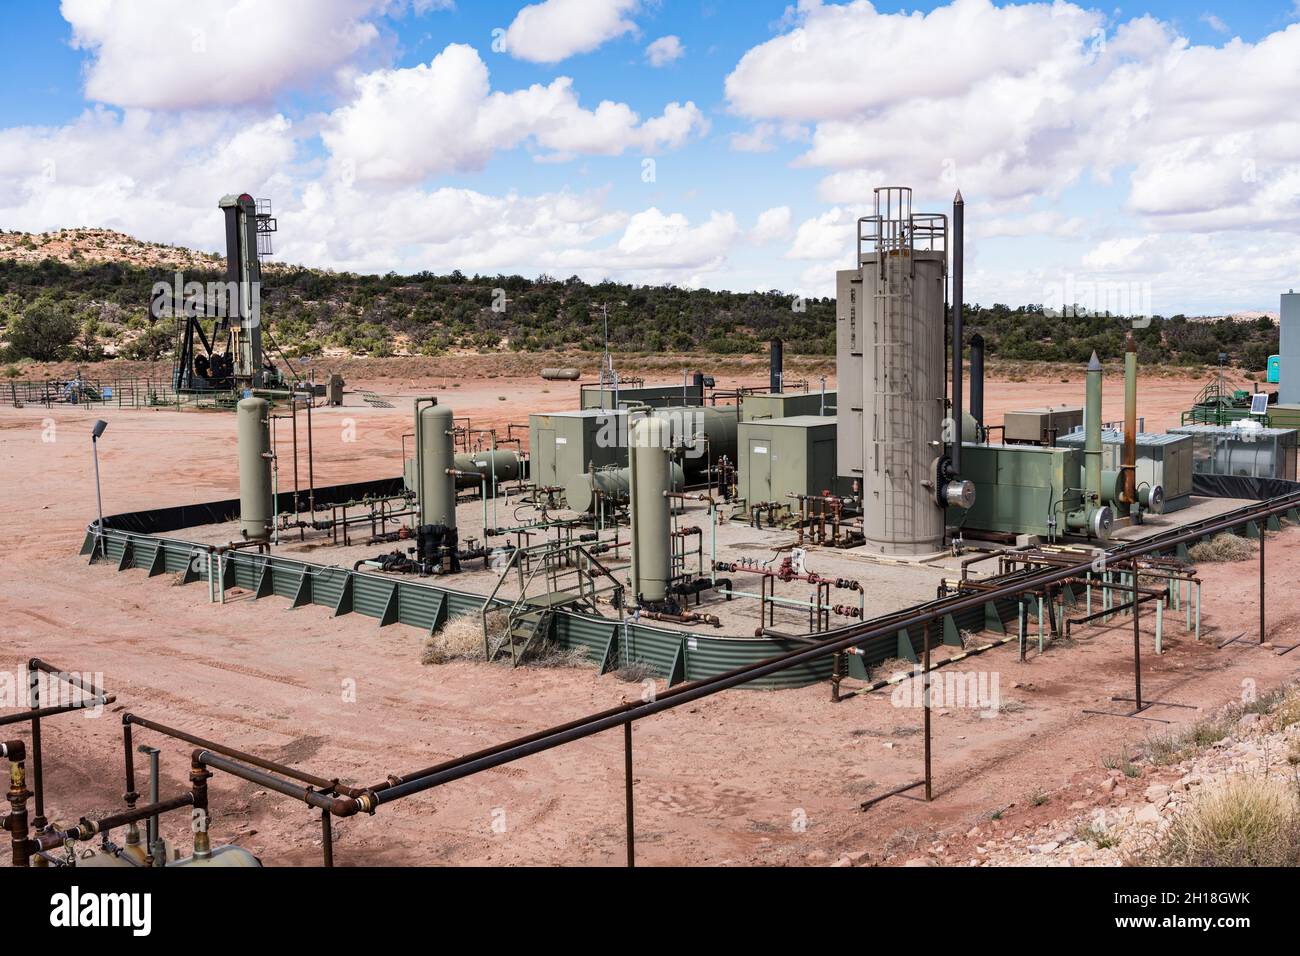 Heater treaters and separators for separting oil, natural gas and water on an oil well location in Utah. Stock Photo